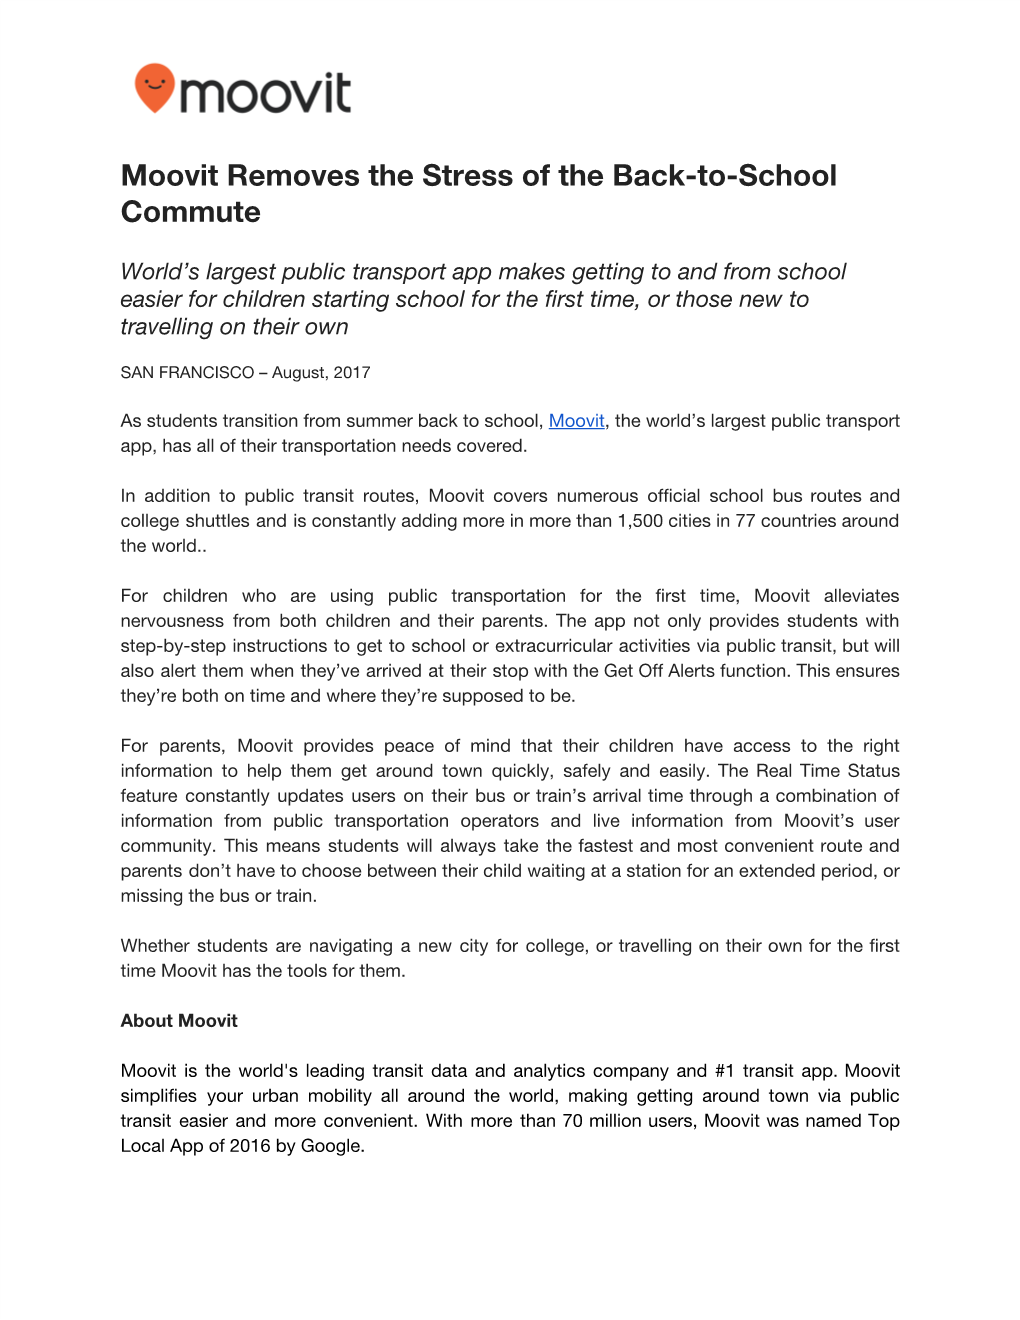 Moovit​ ​Removes​ ​The​ ​Stress​ ​Of​ ​The​ ​Back-To-School